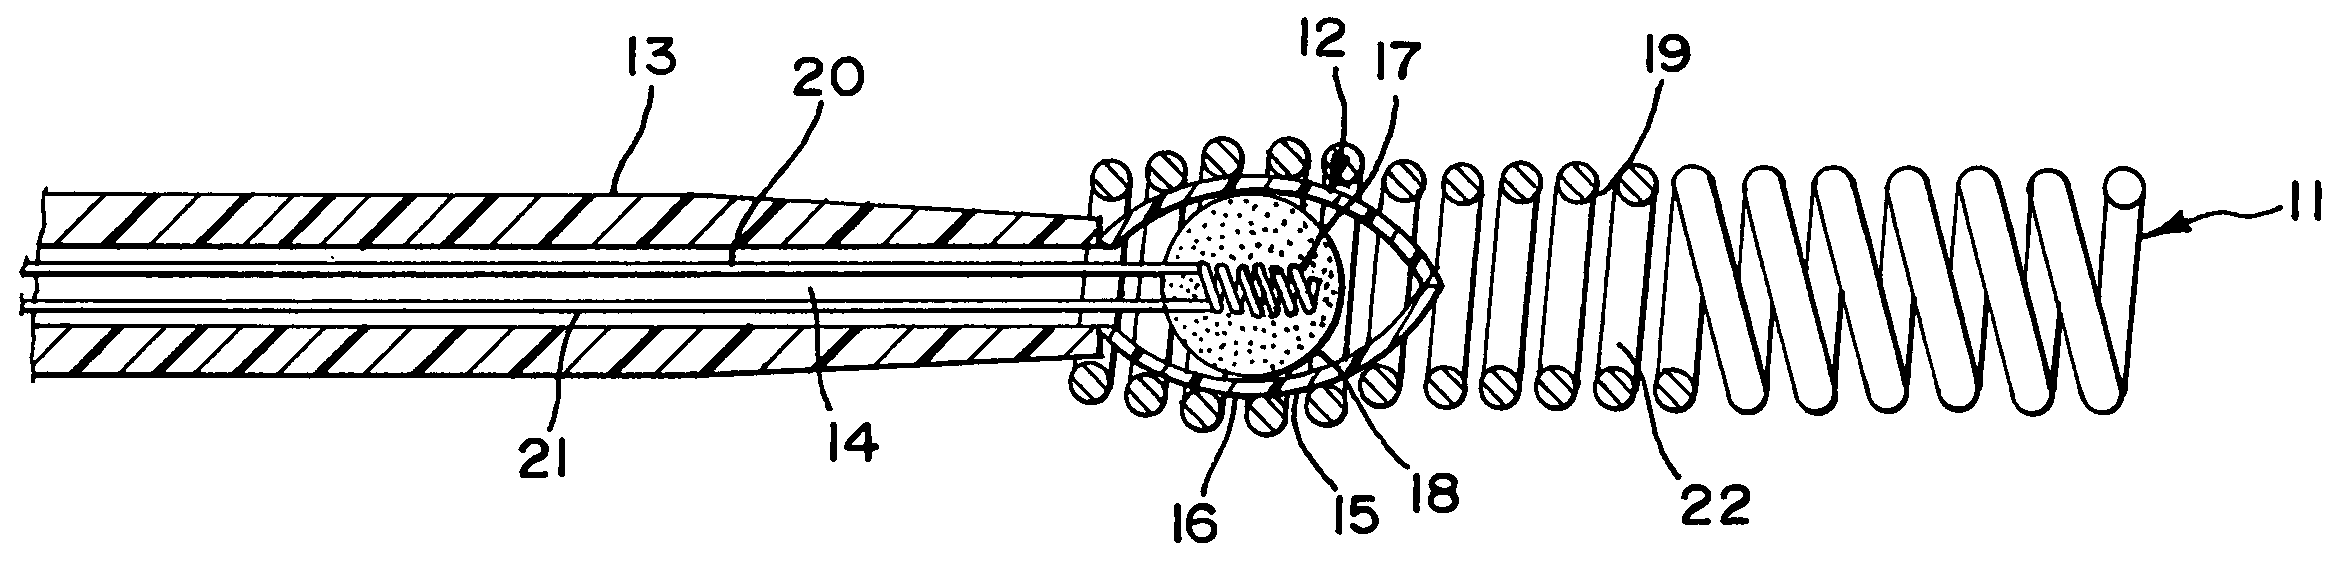 Heated mechanical detachment for delivery of therapeutic devices